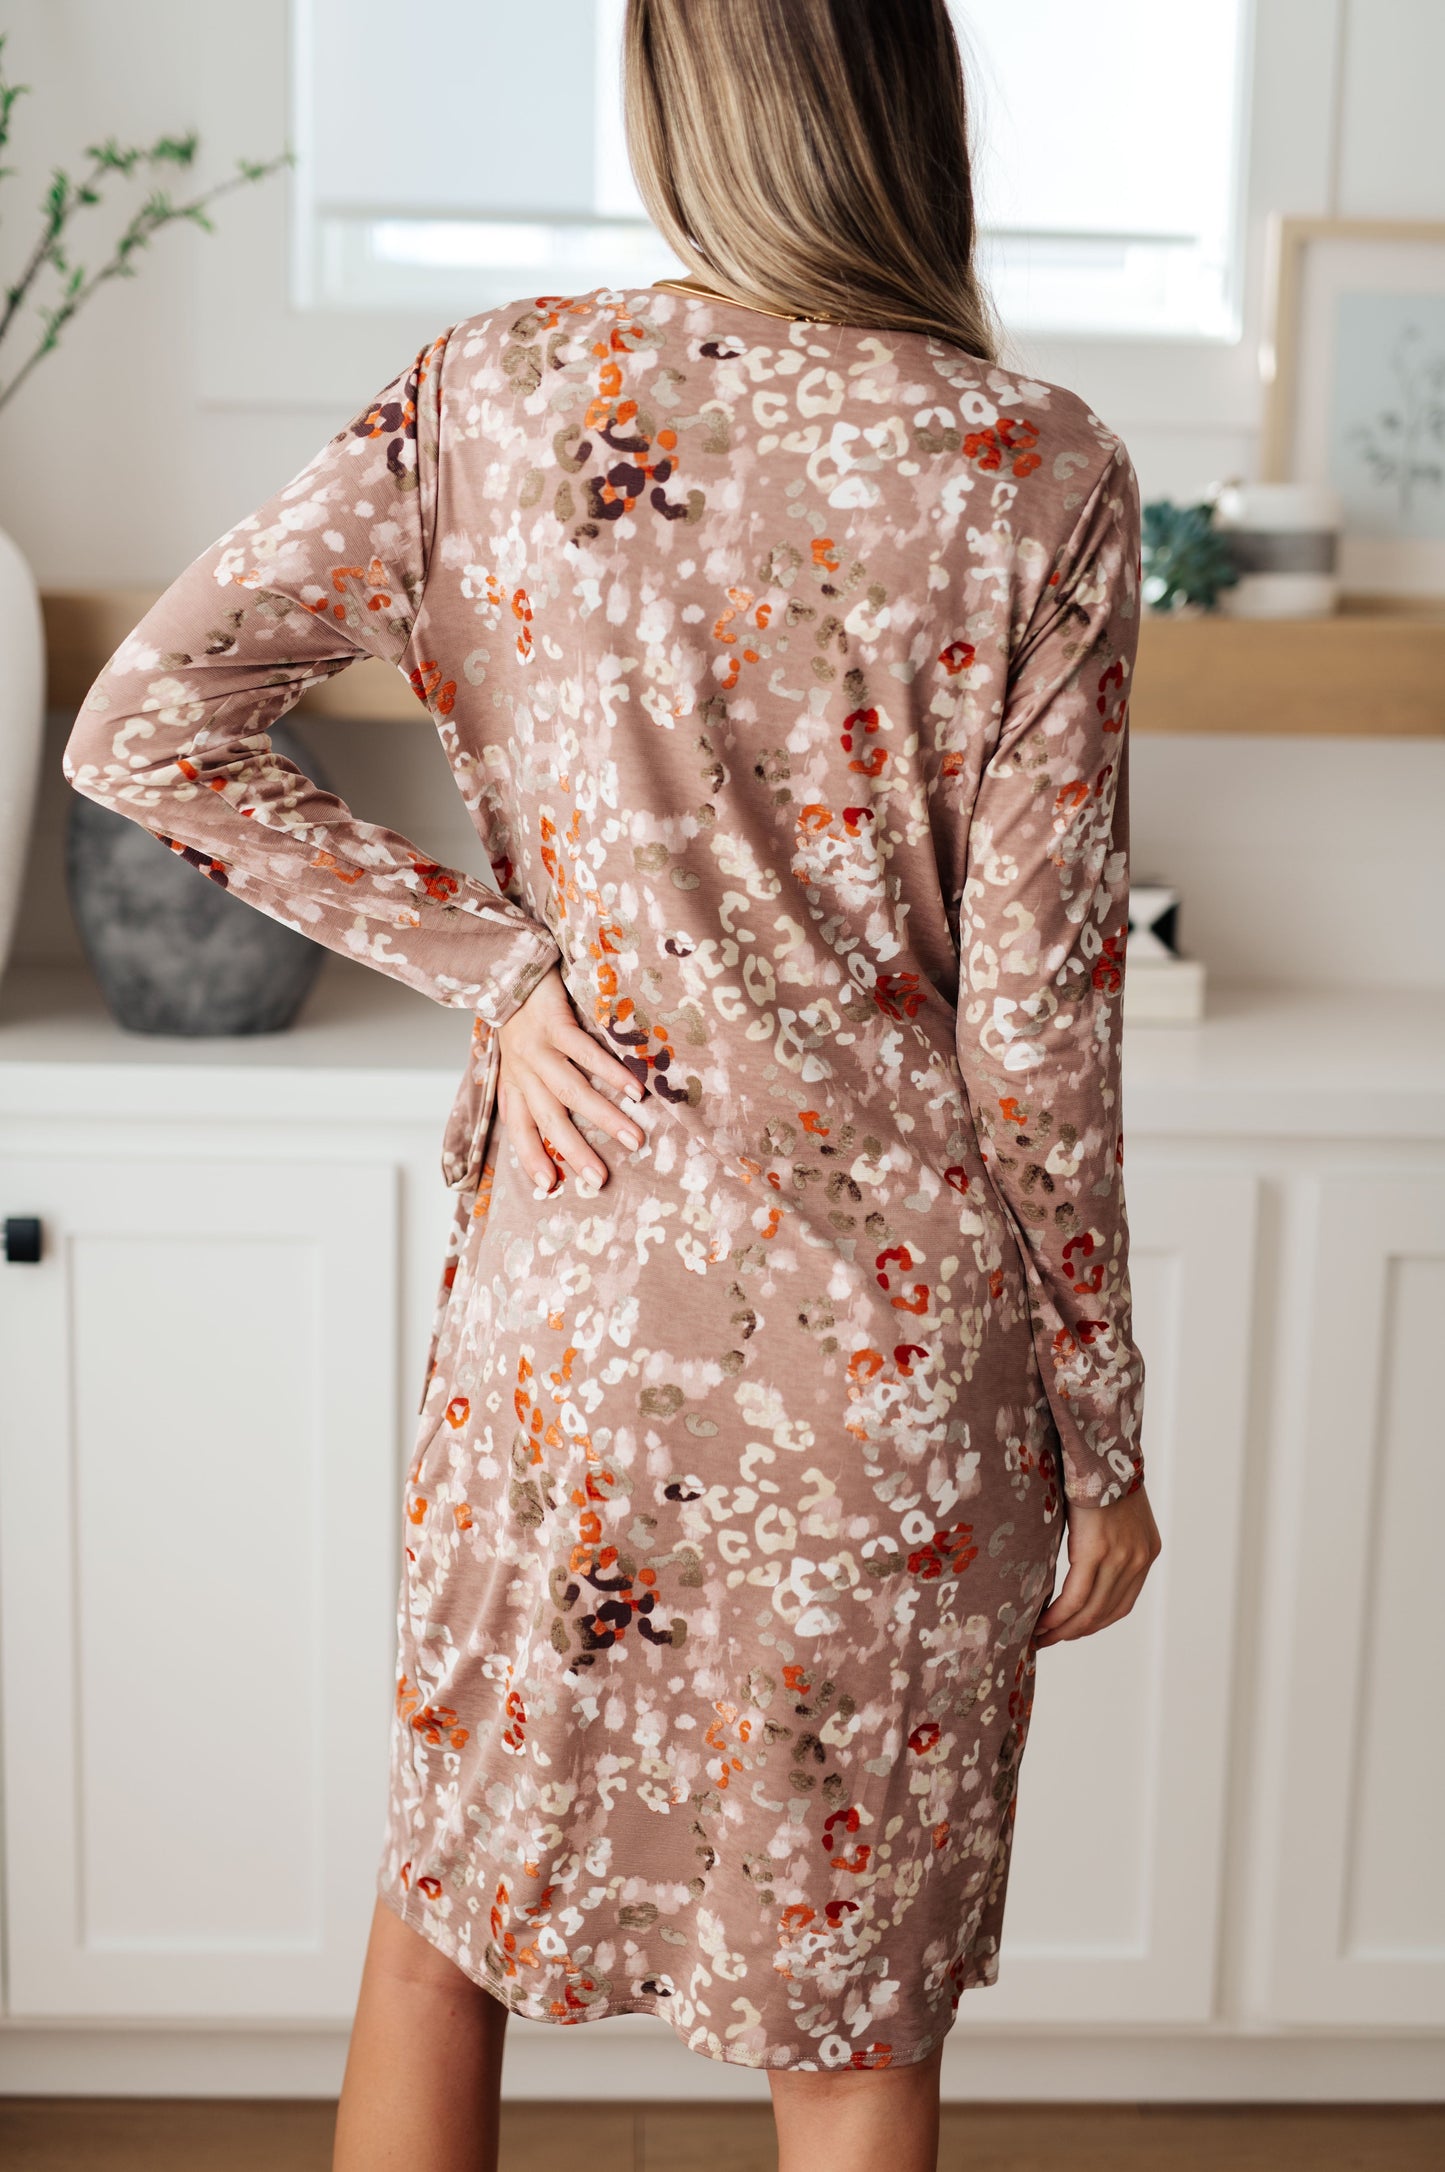 Honey Do I Ever Faux Wrap Dress in Taupe - Three Bears Boutique